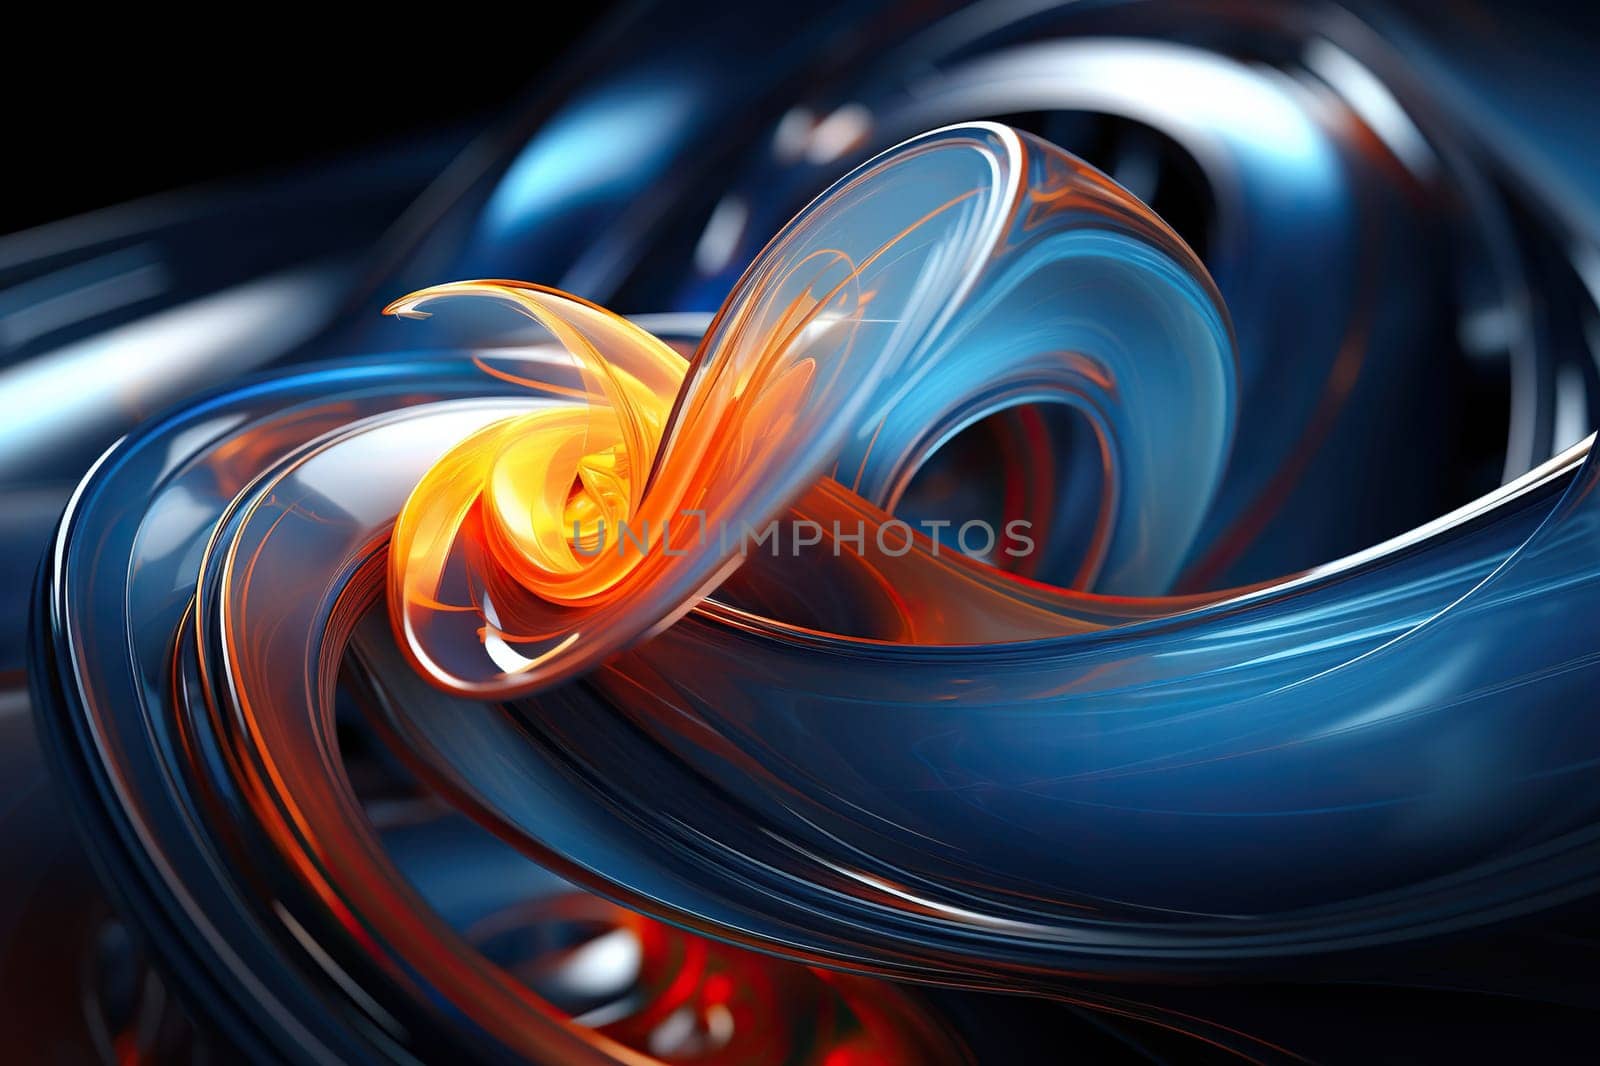 Abstract blue wave pattern with liquid effect on a dark background.